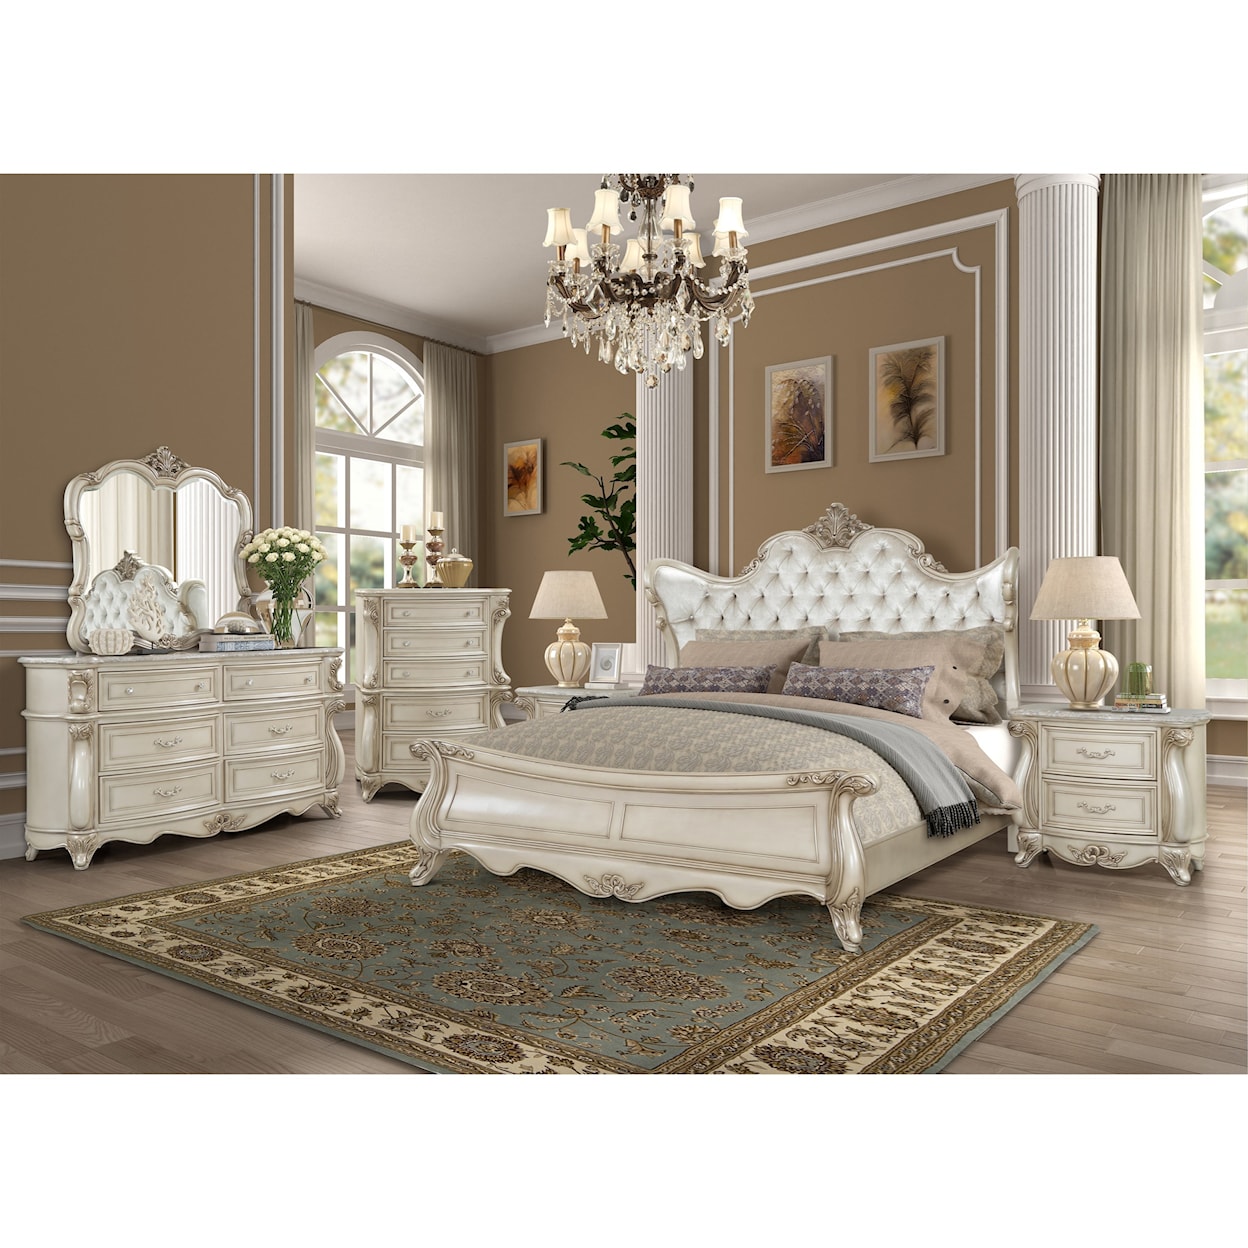 New Classic Furniture Monique King Bedroom Group